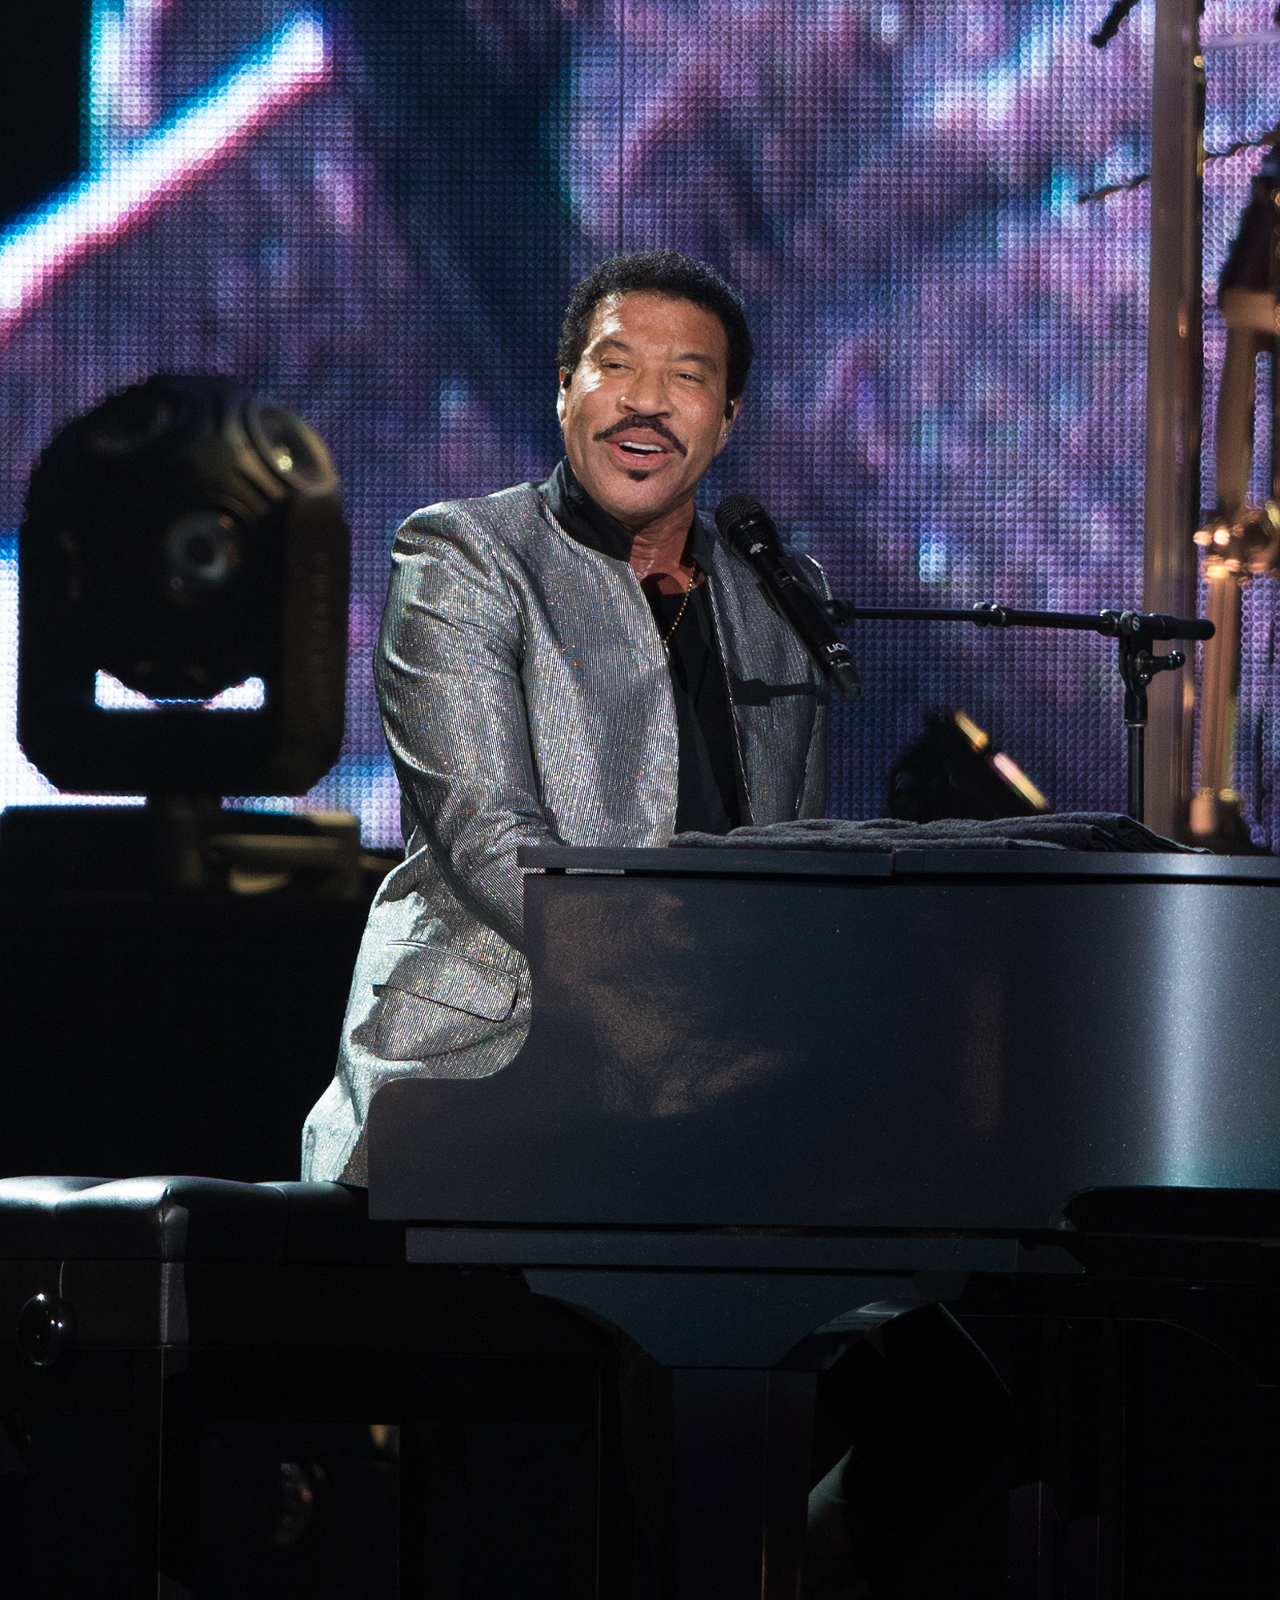 Lionel Richie plays Amalie Arena in Tampa, Florida on August 11, 2017.